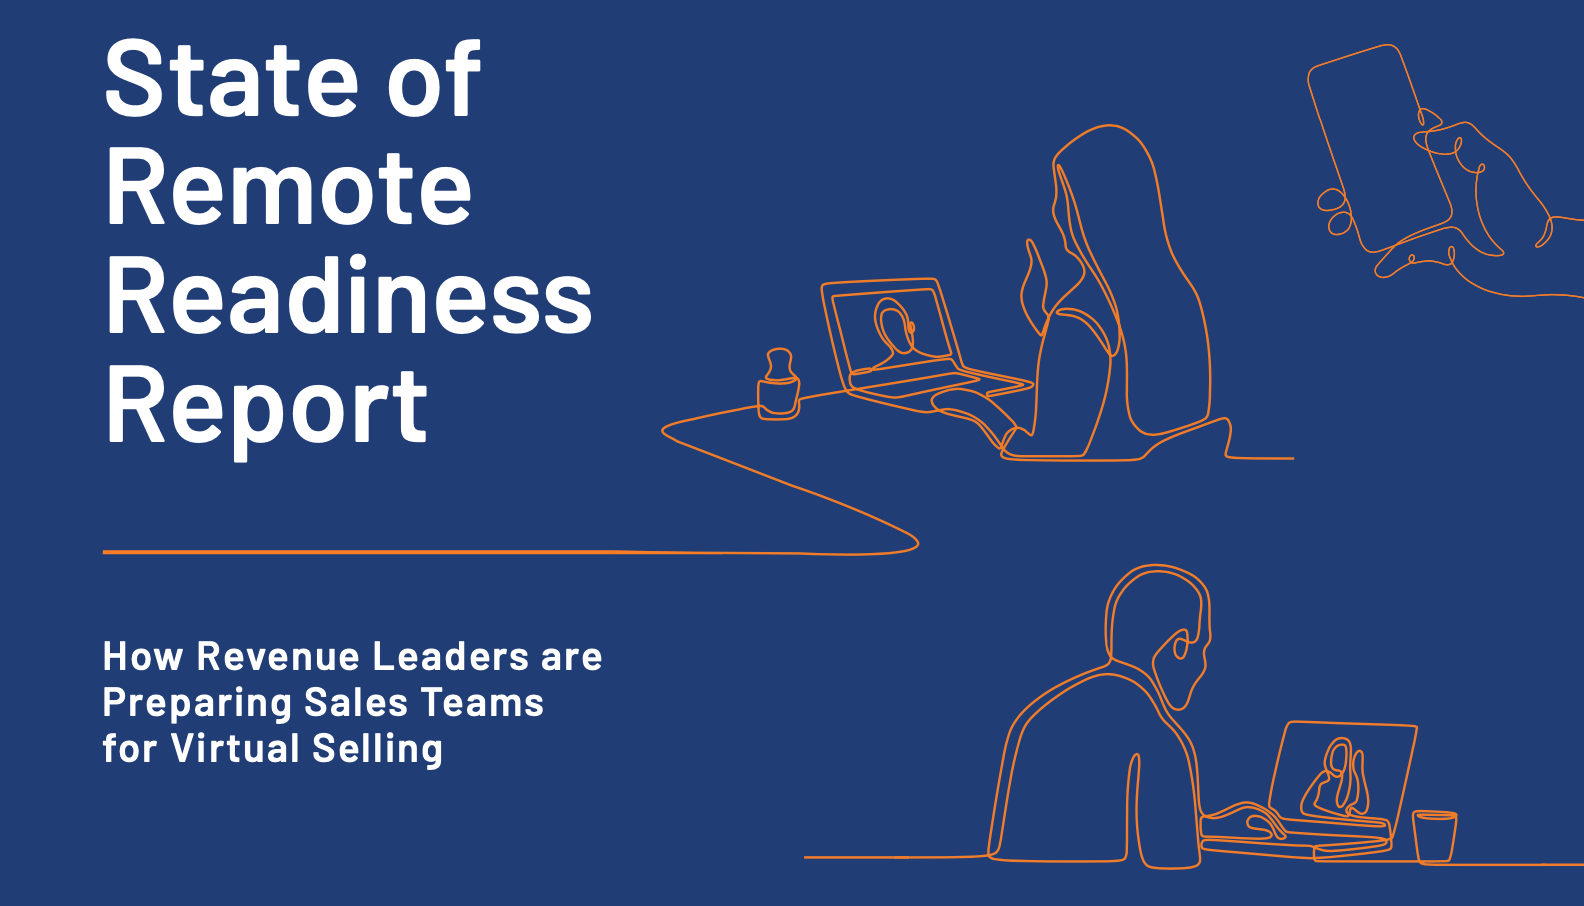 The State of Remote Readiness Report